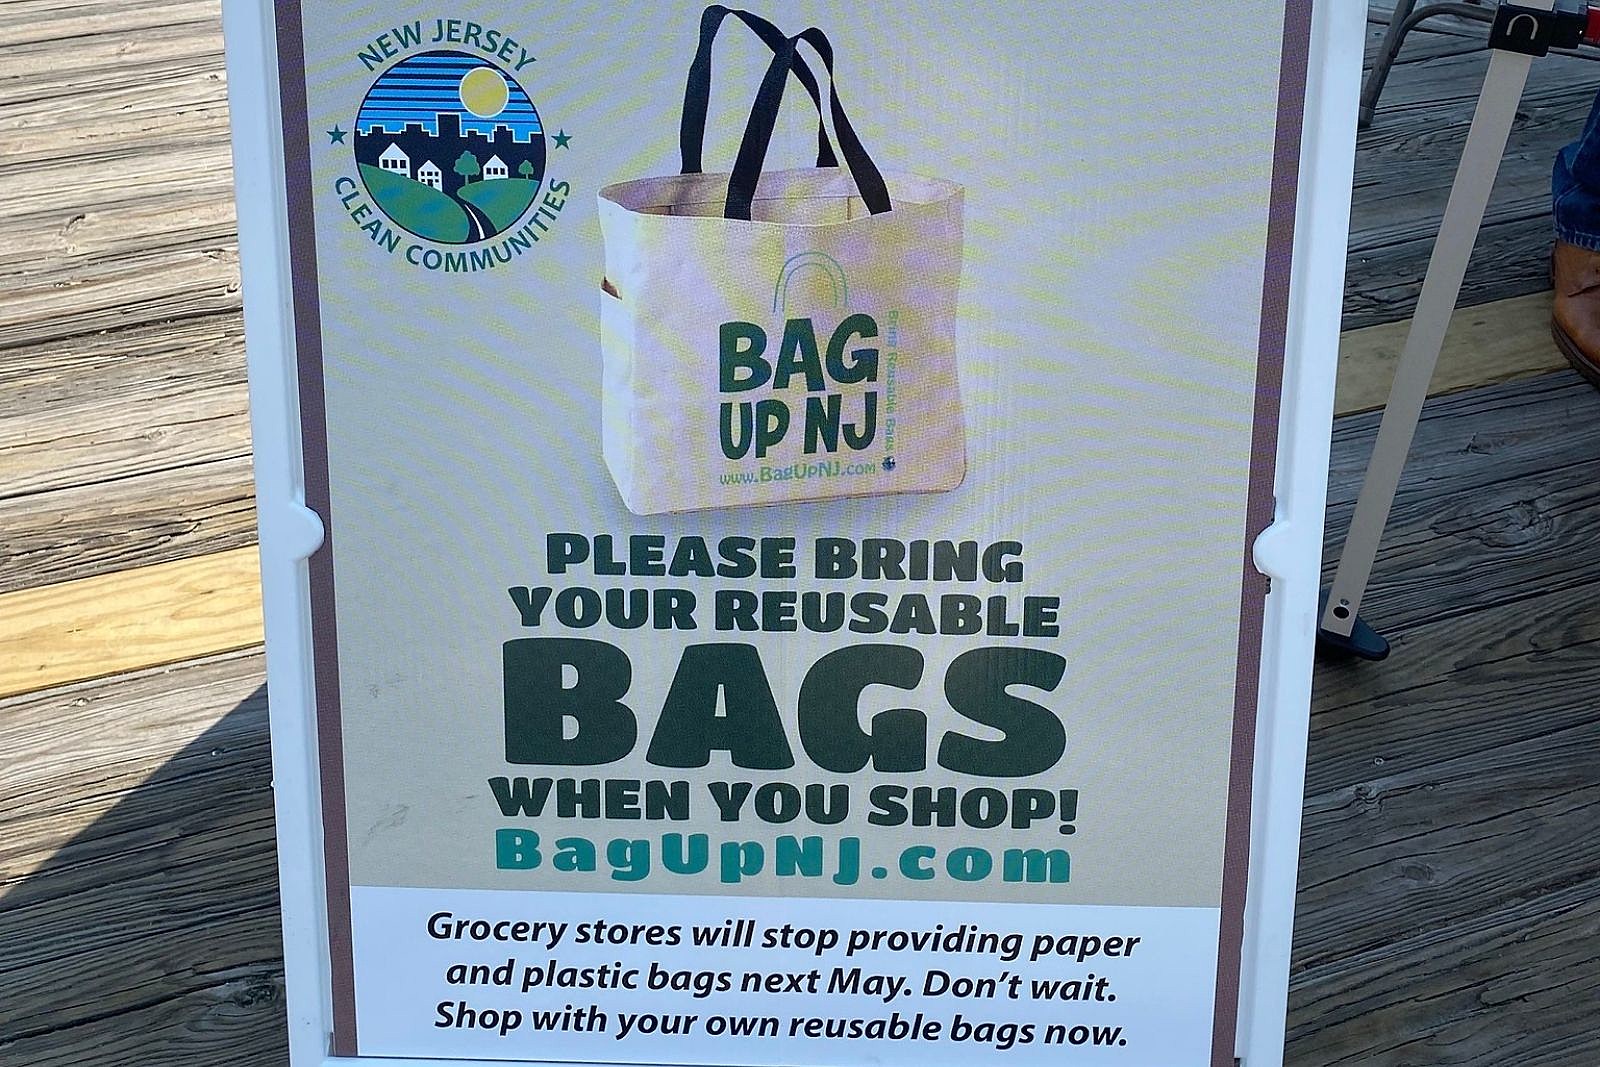 Philly's plastic bag ban has started. 